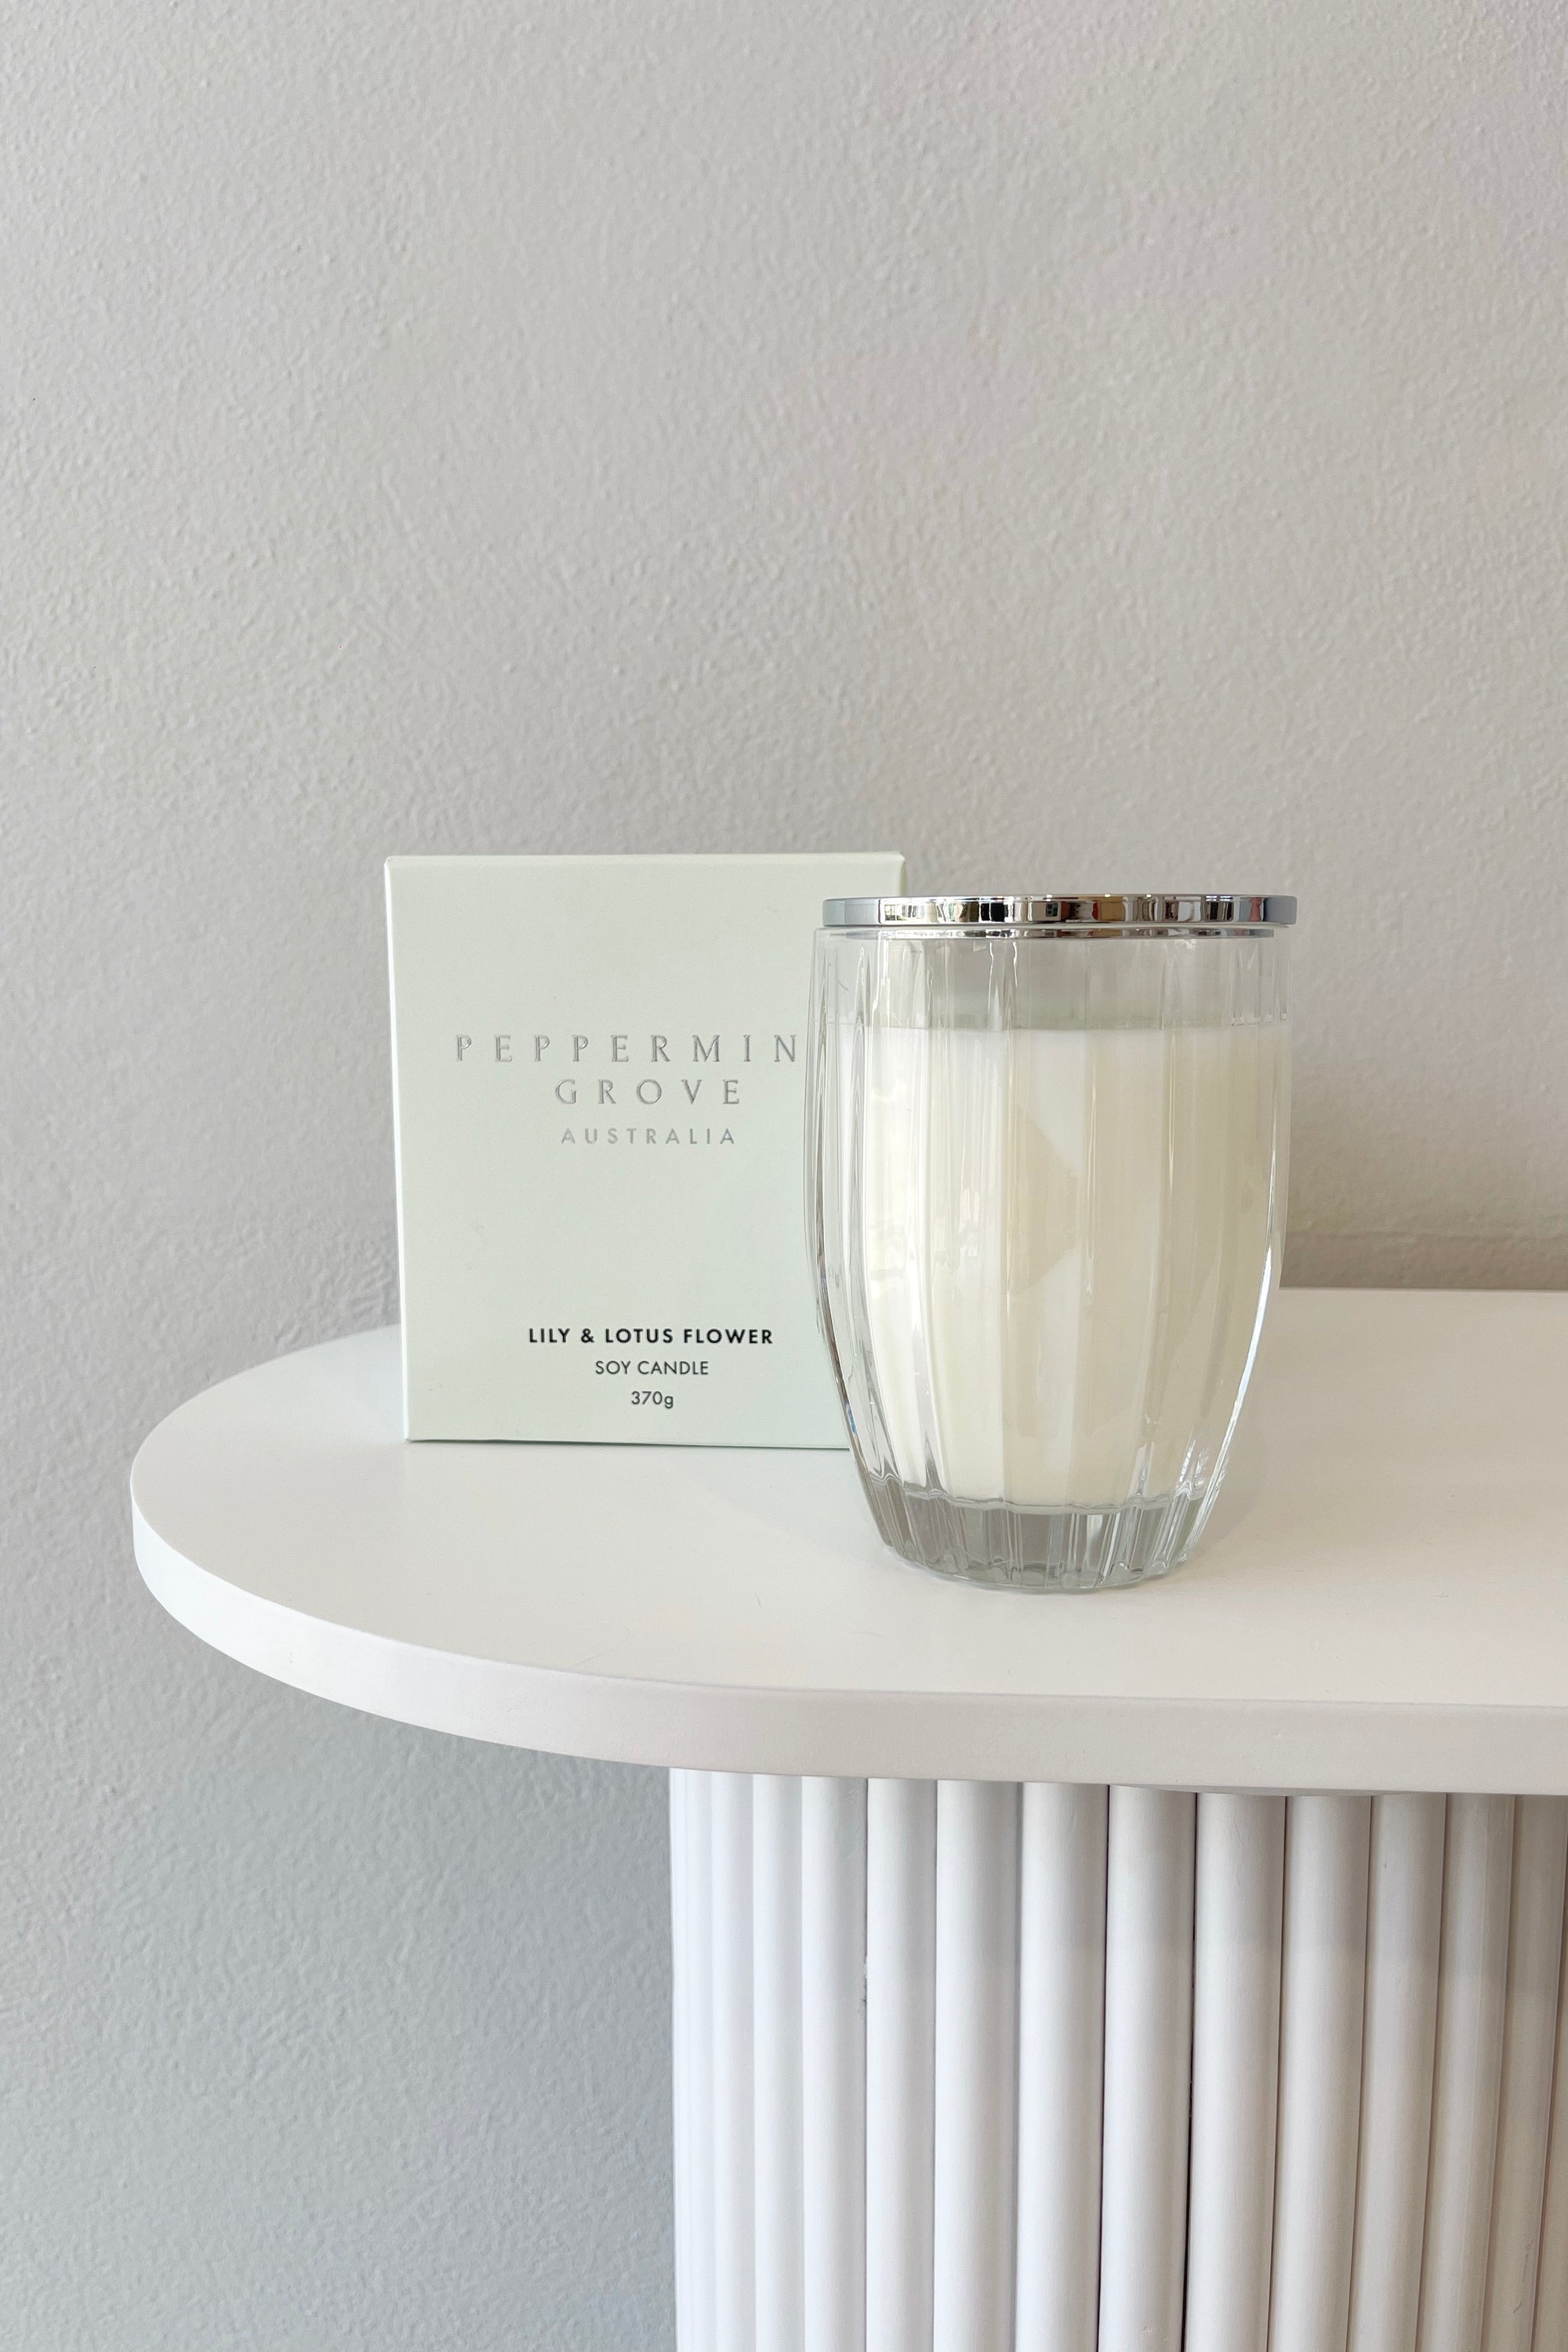 Peppermint Grove Soy Candle | Lily & Lotus Flower